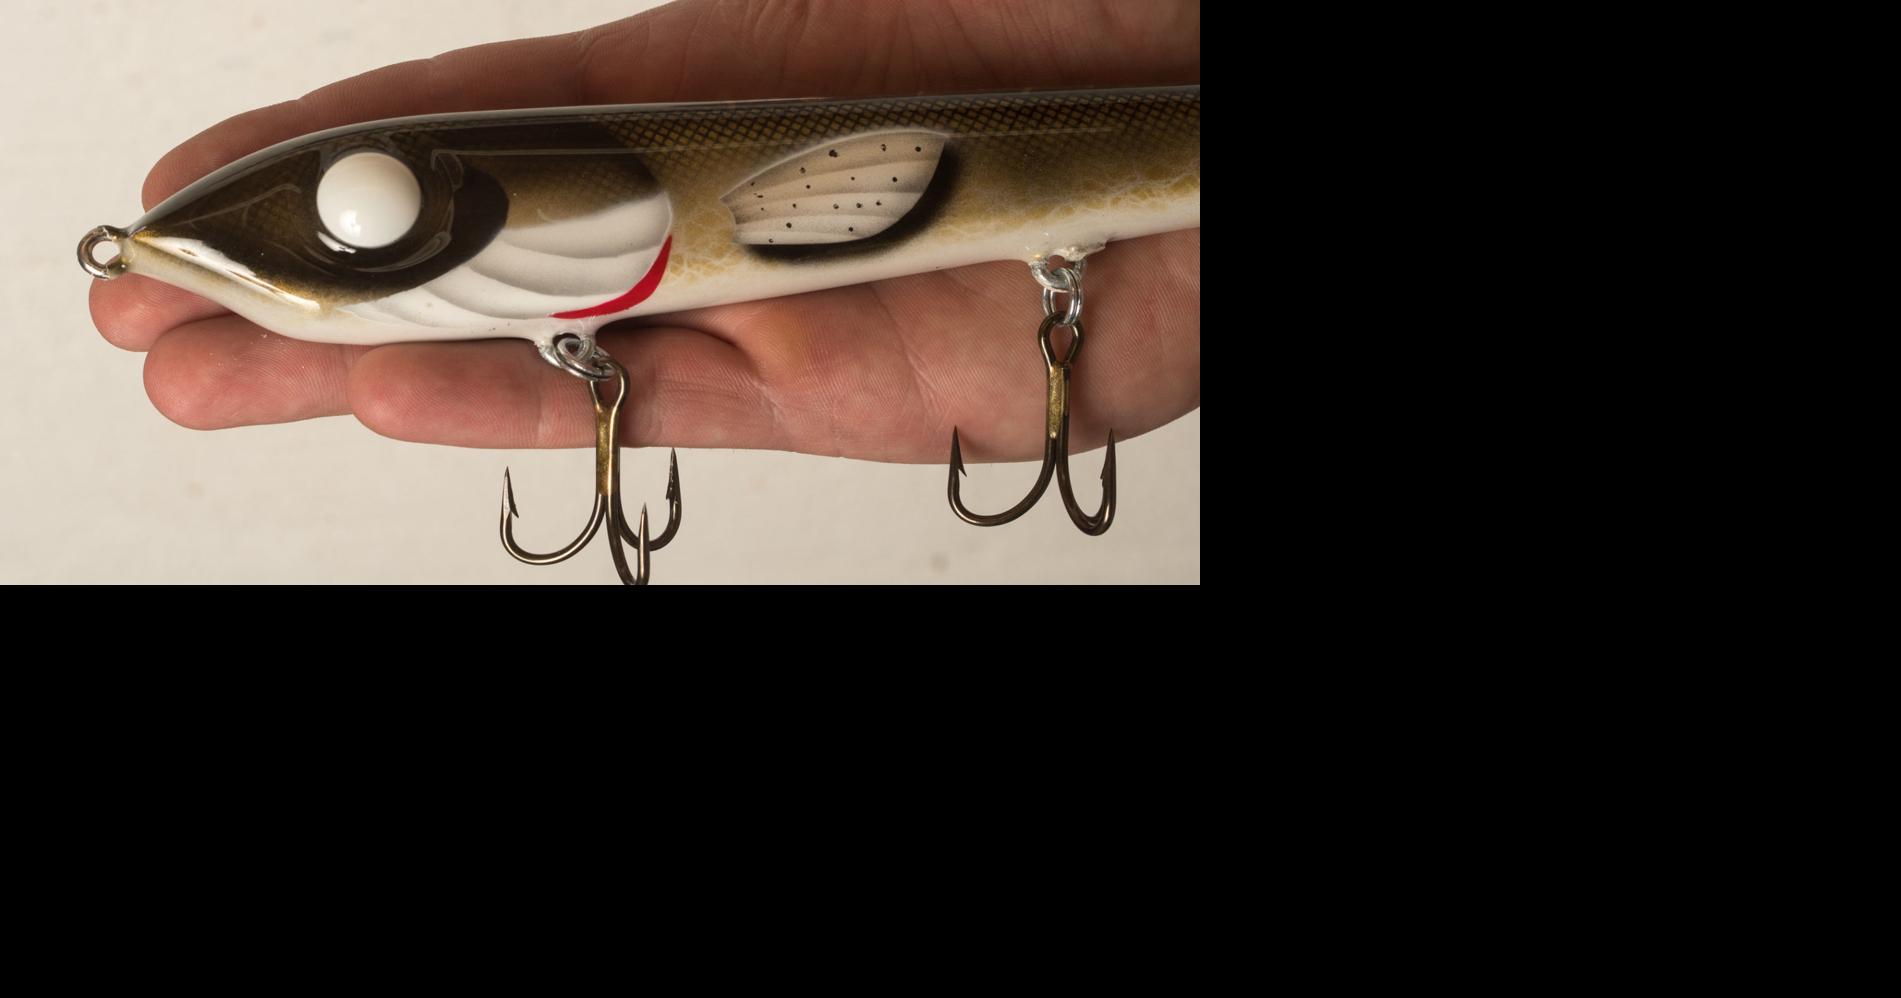 Can you use nail polish to paint fishing lures? Painting with a